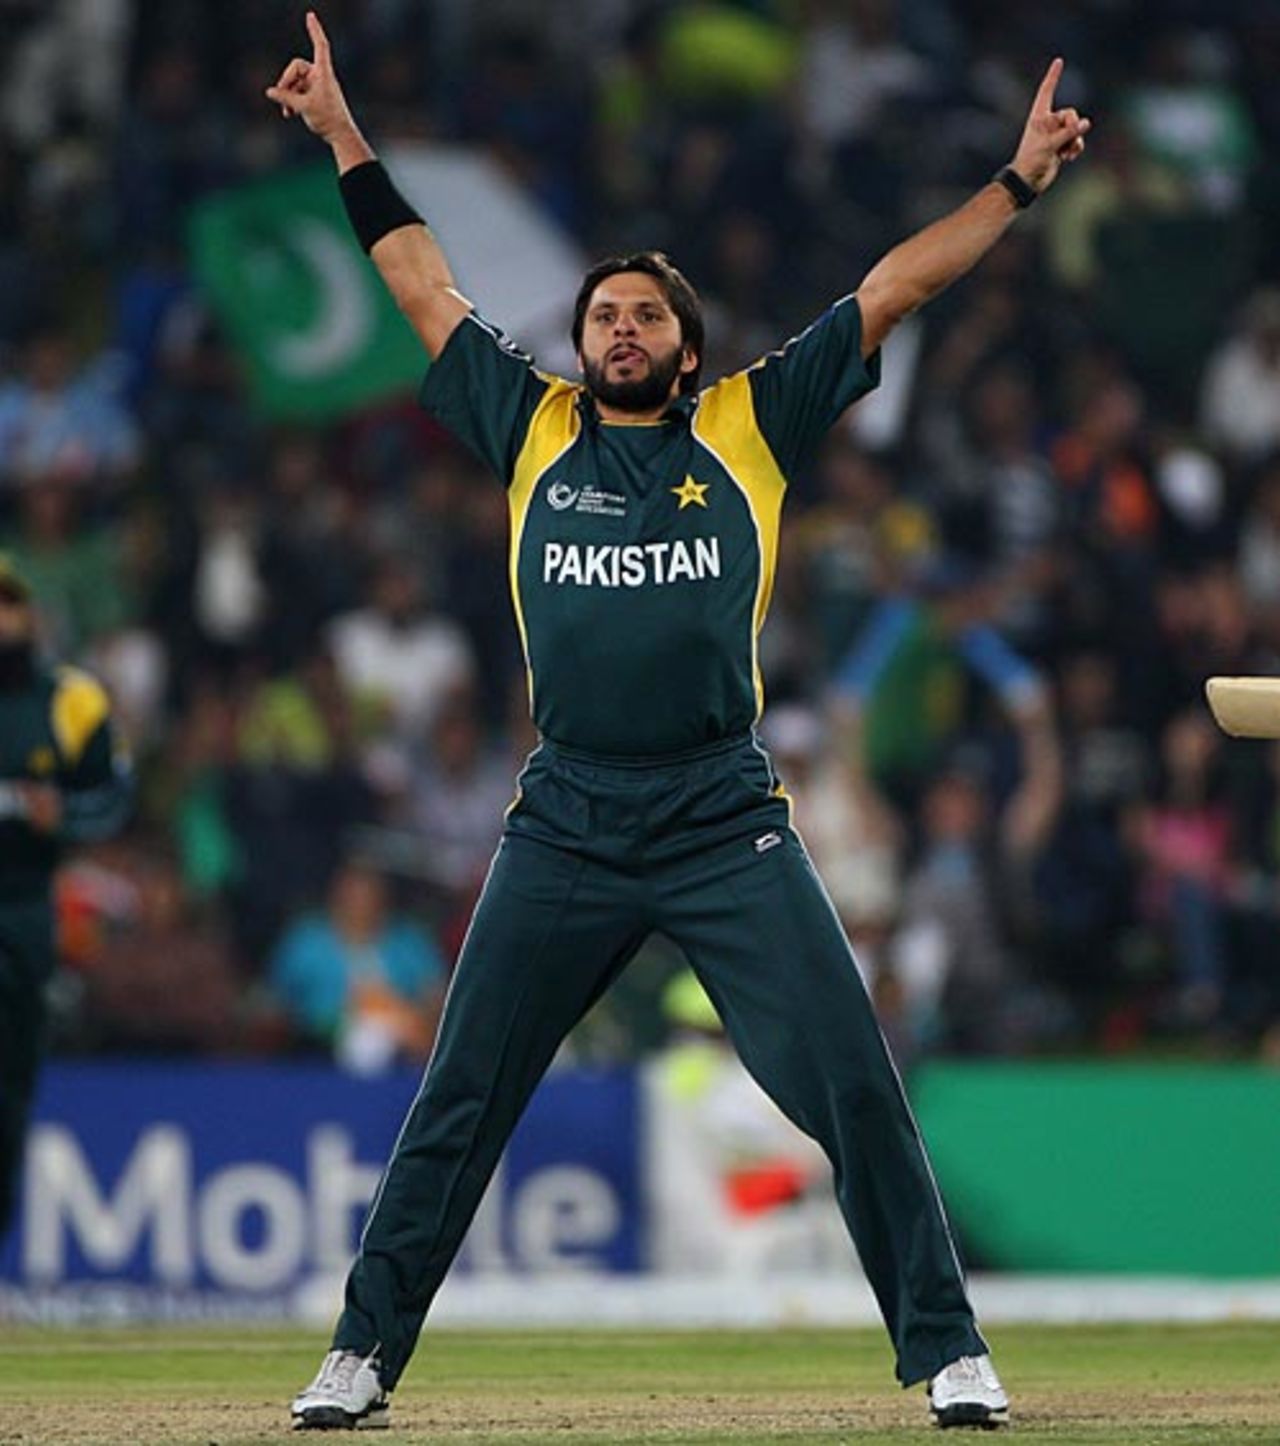 Shahid Afridi does his version of an Andrew Flintoff celebration, India v Pakistan, Champions Trophy, Group A, Centurion, September 26, 2009